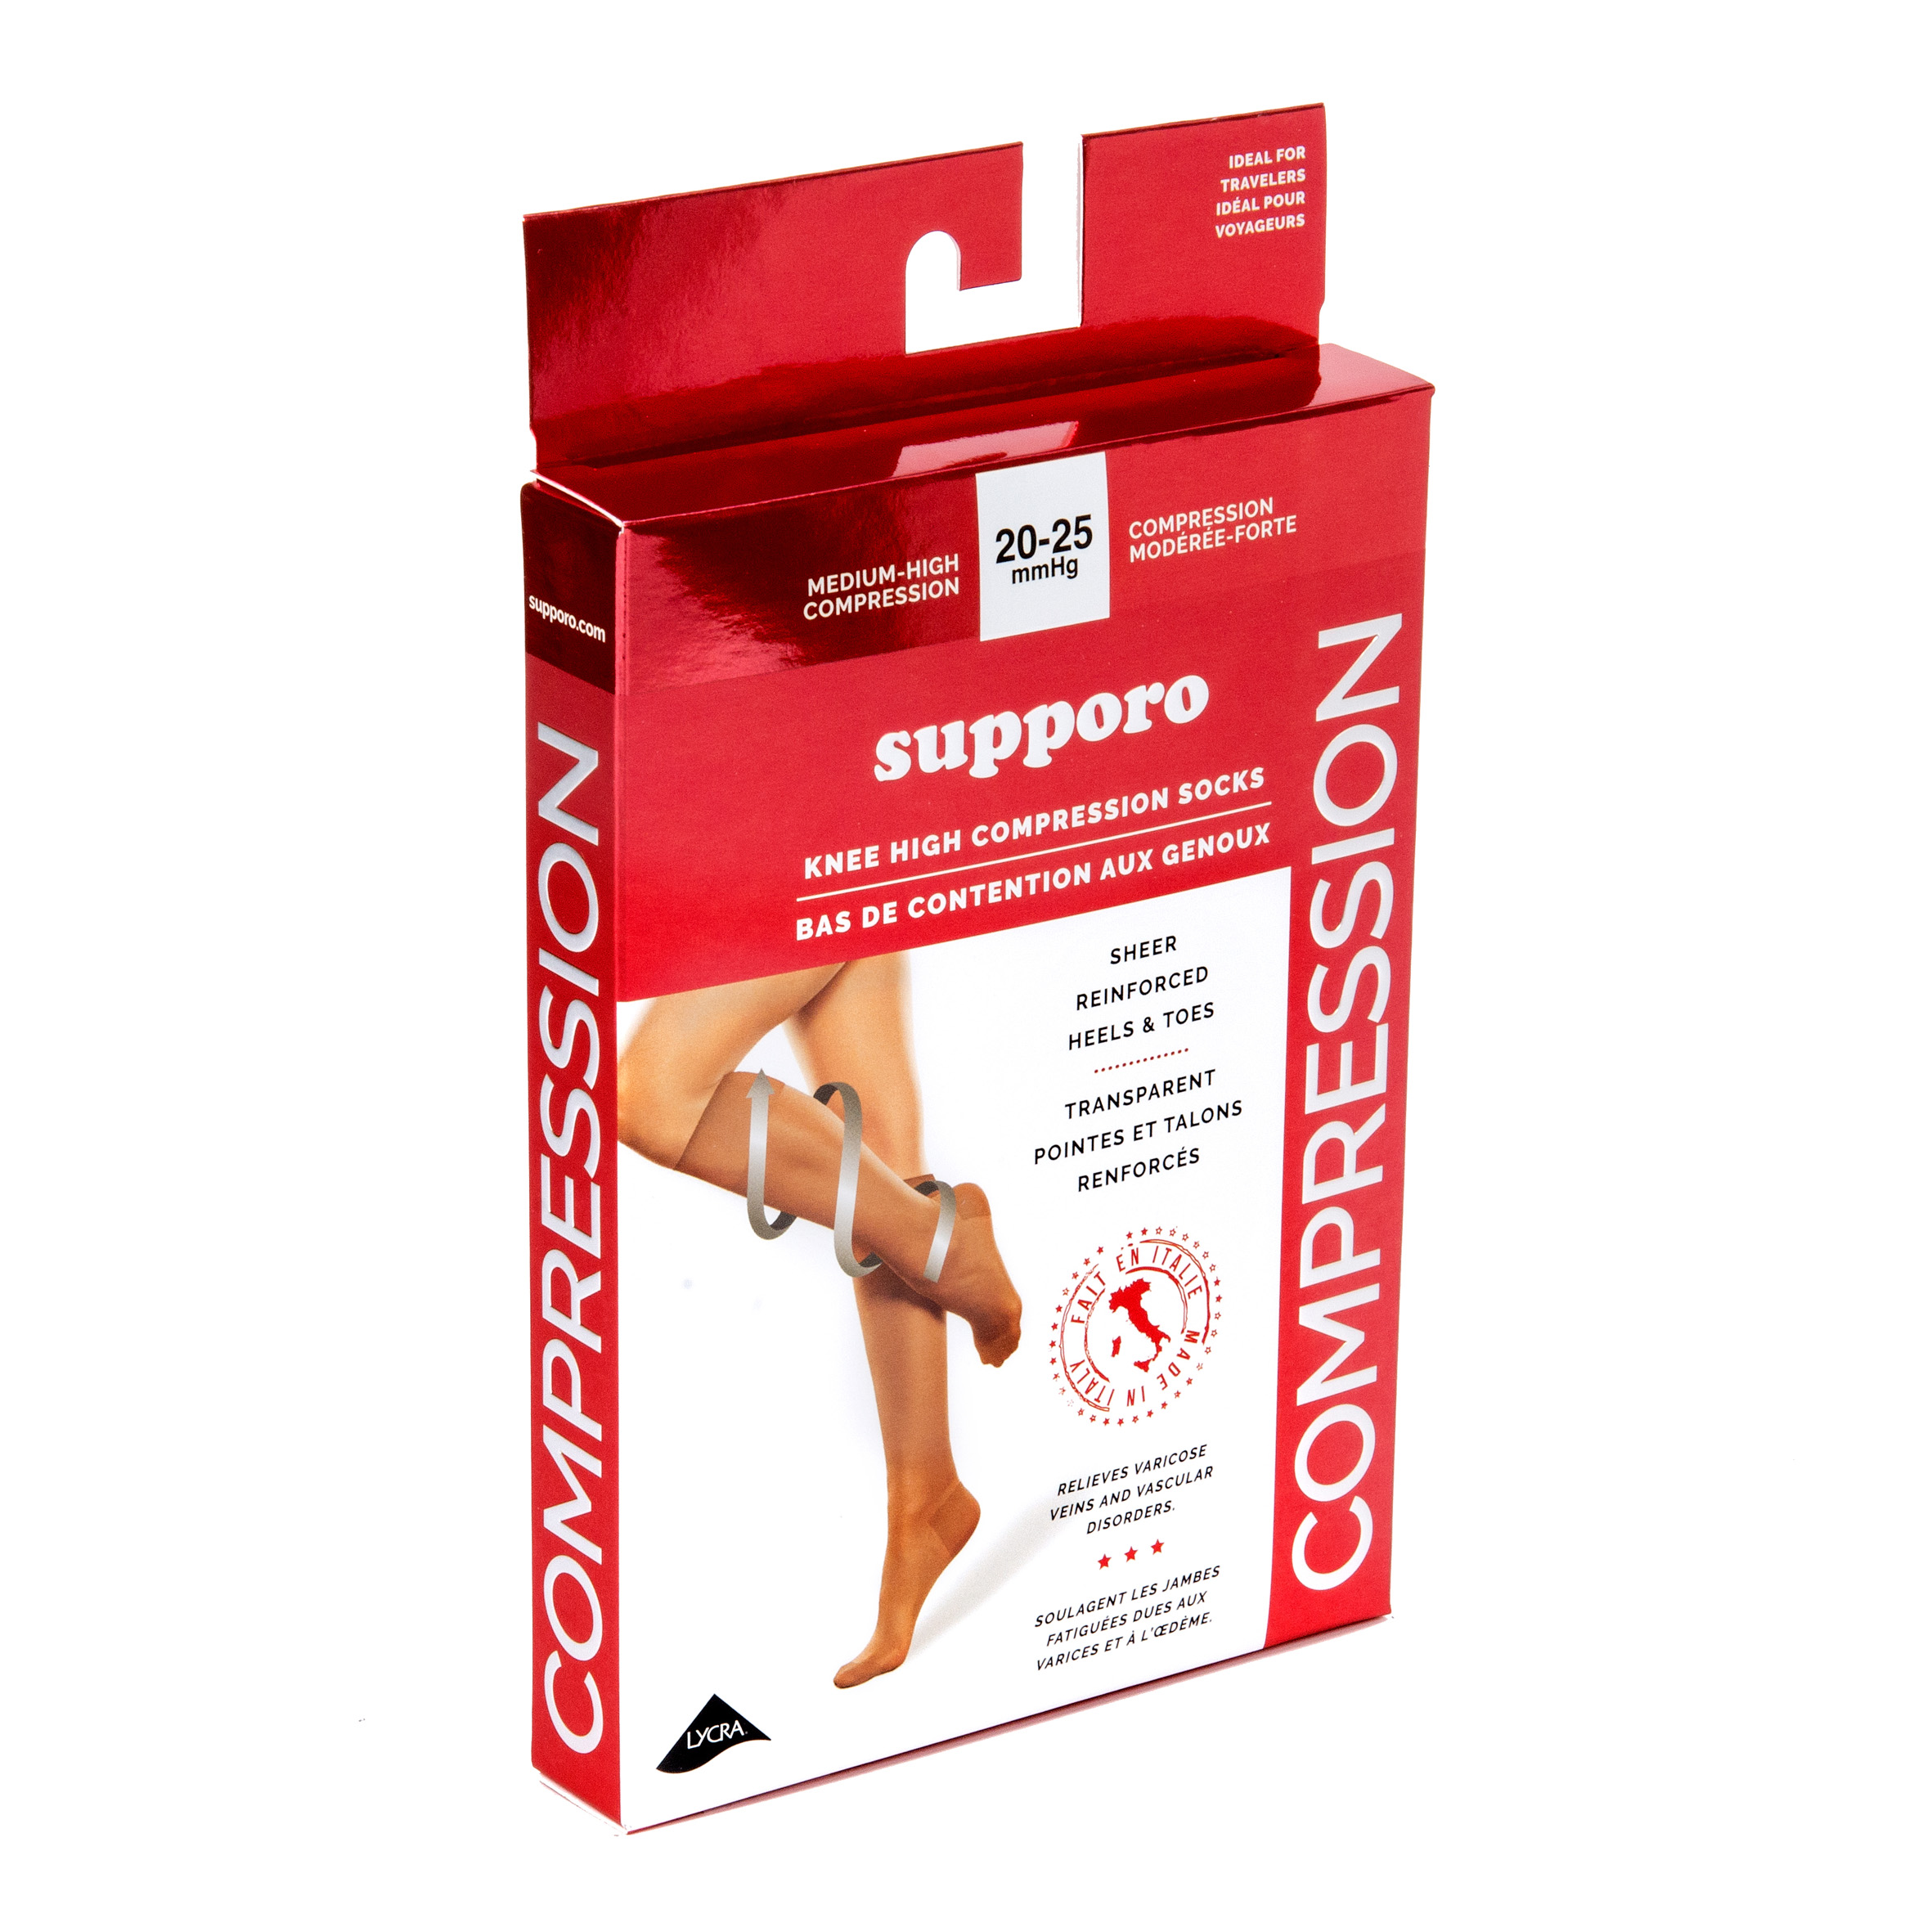 Supporo Sheer Knee-high Compression Socks, 20-25 mmHg - Supporo